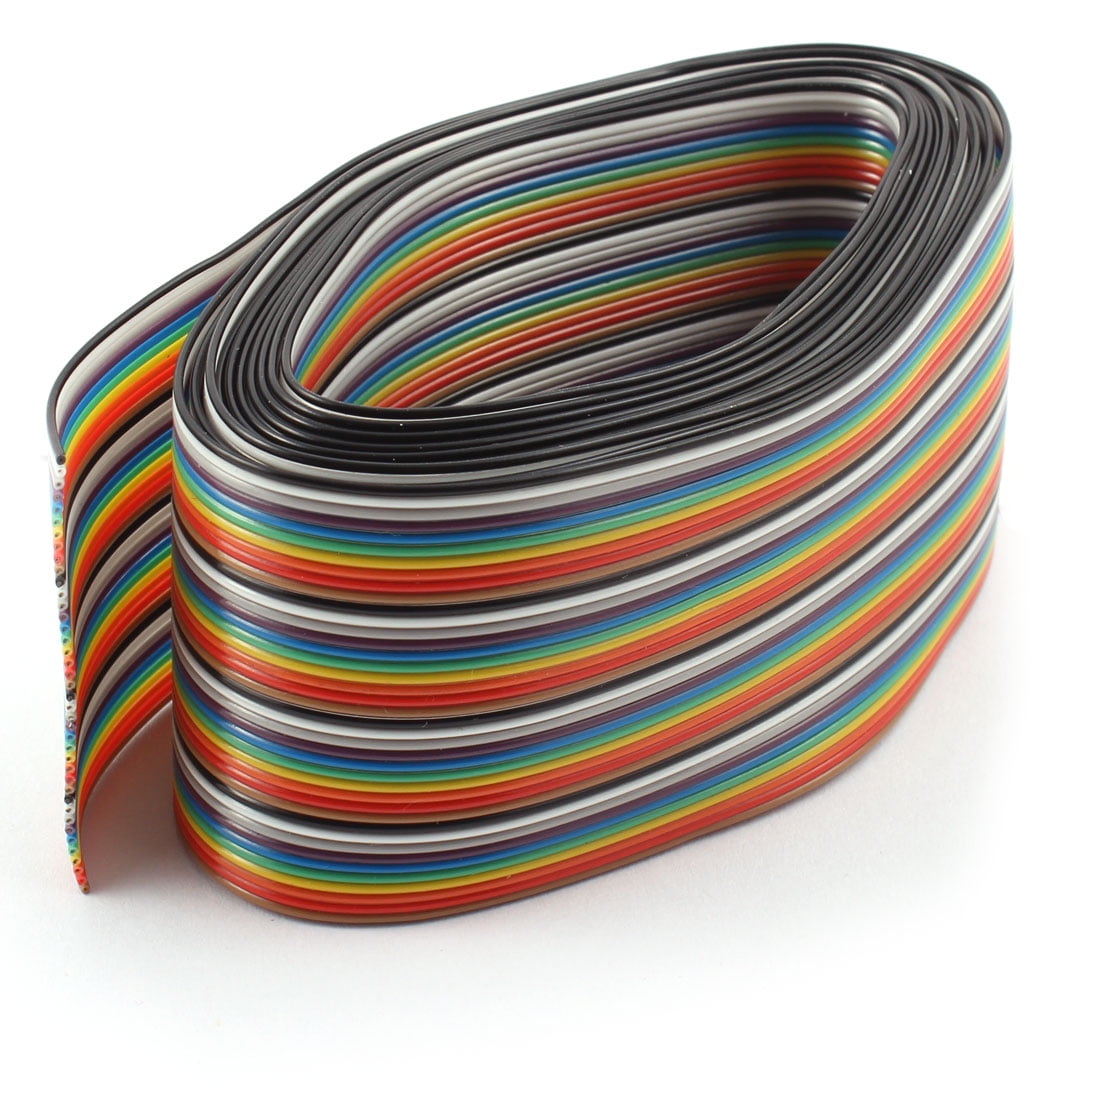 1M 3.3ft 40 Pin Flat Color Rainbow Ribbon IDC Cable Wire Rainbow Cable New 